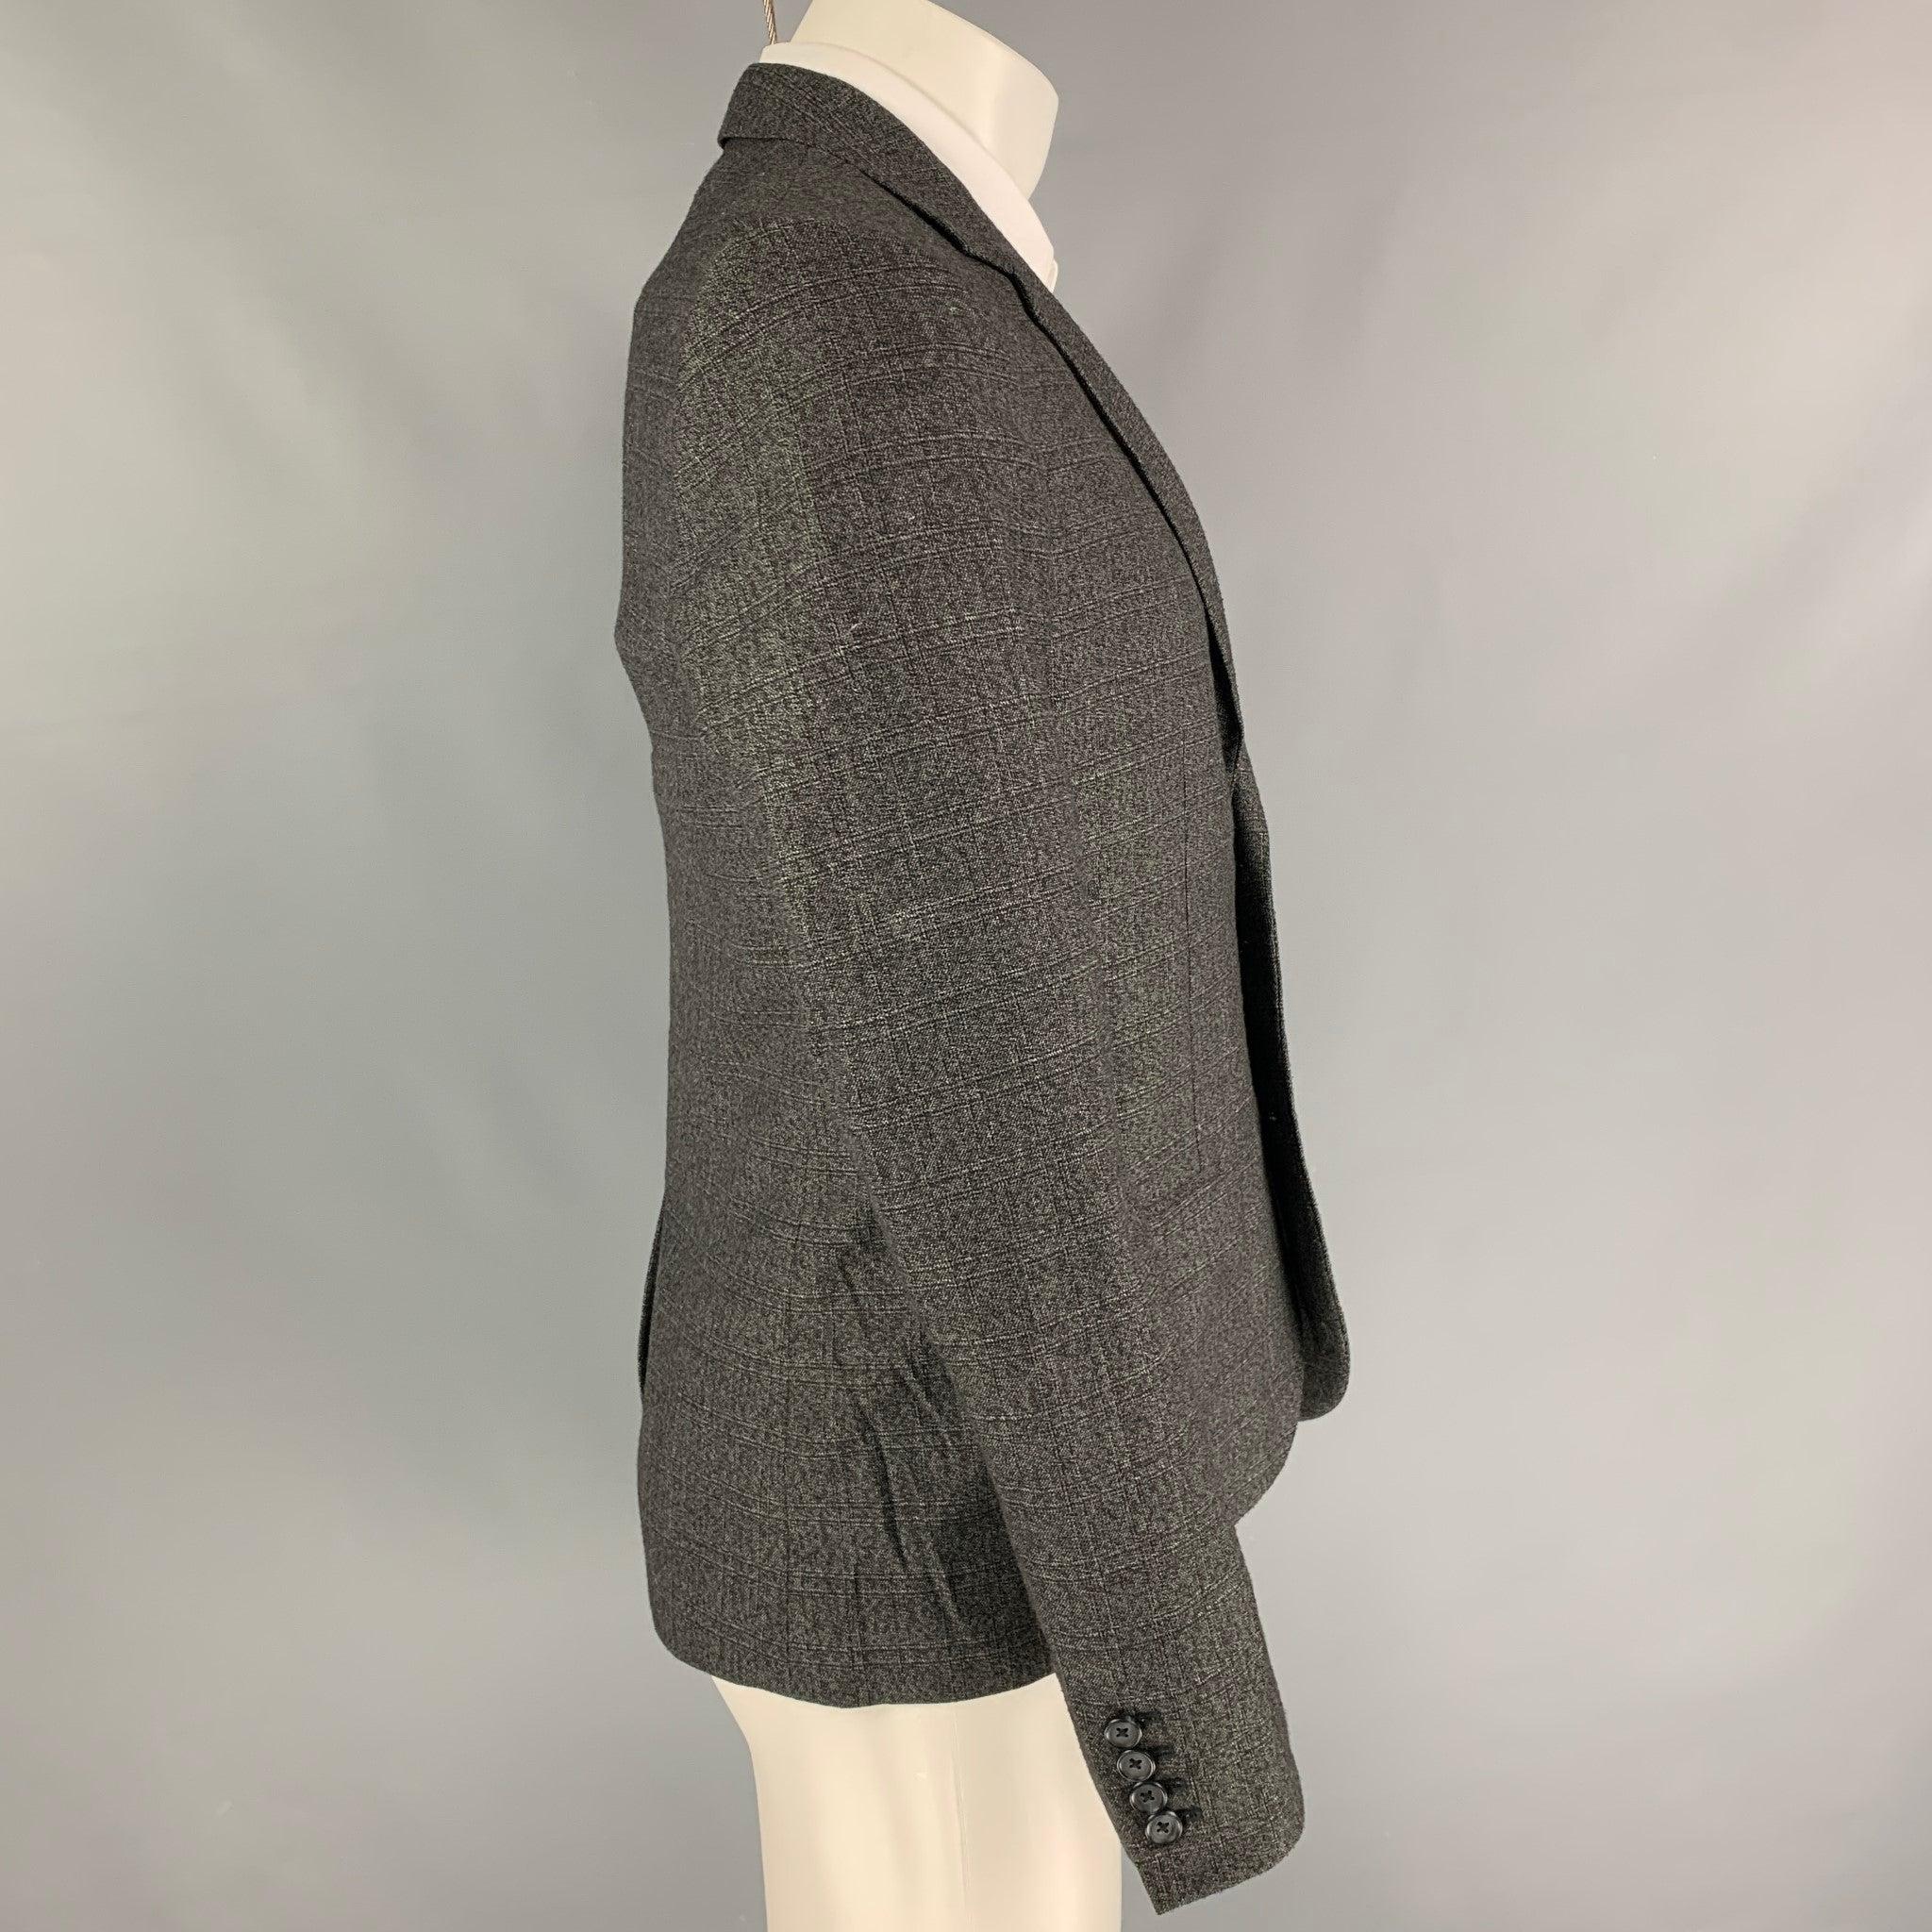 MARC by MARC JACOBS Charcoal Heather Wool Blend Notch Lapel Sport Coat In Good Condition For Sale In San Francisco, CA